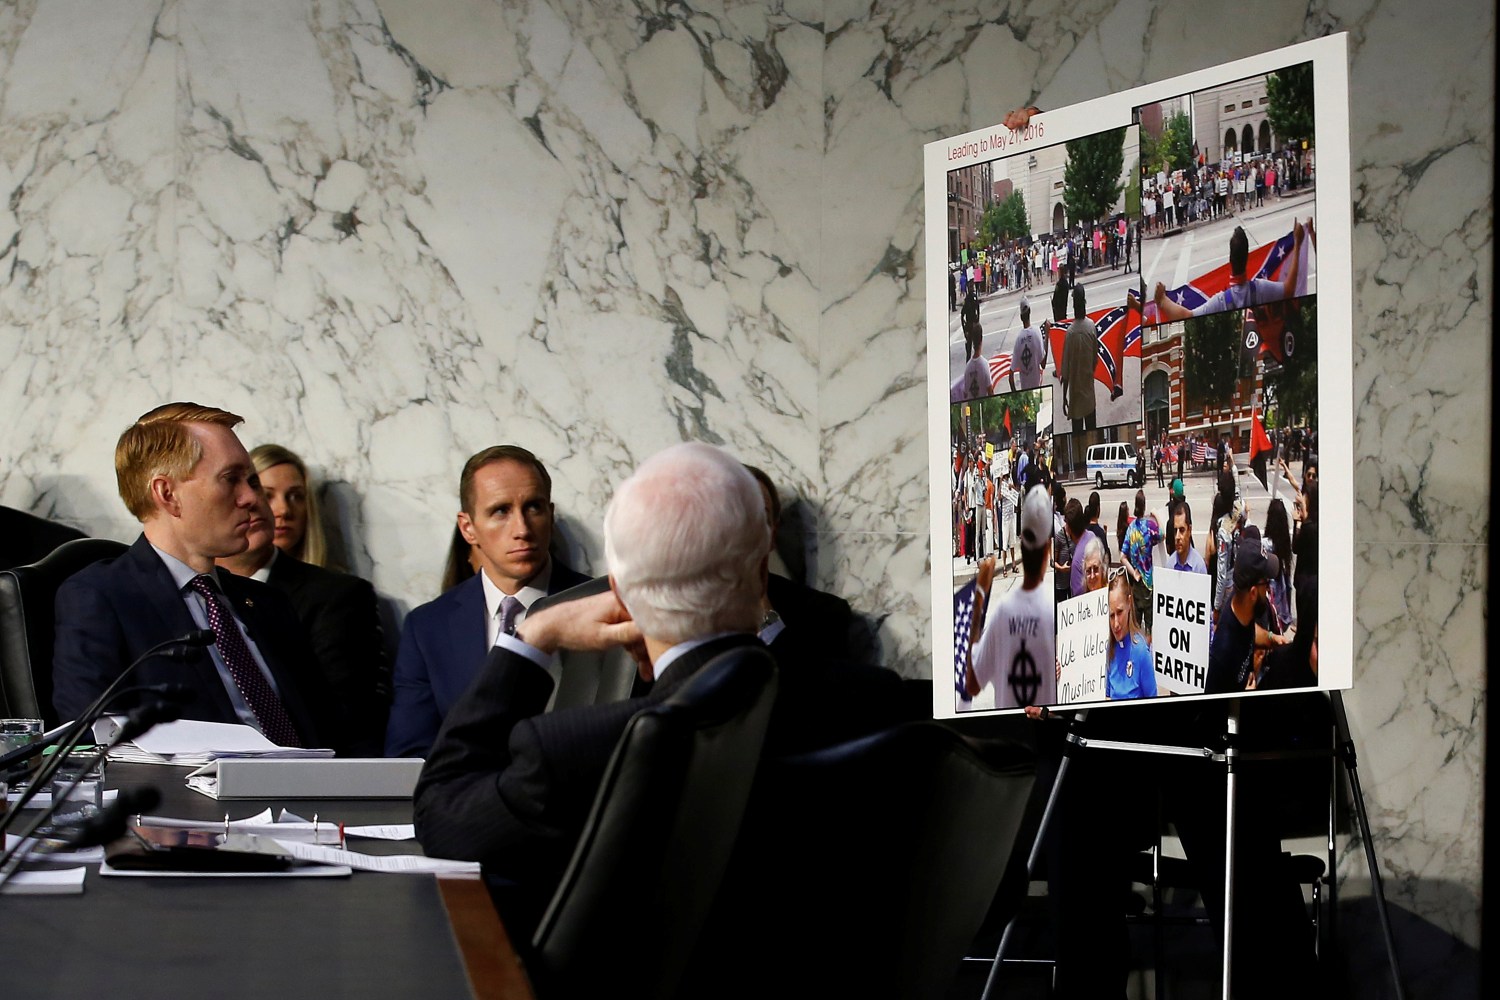 Senators look at a placard presented as evidence of Russian social media manipulation, during a Senate Intelligence Committee hearing to answer questions related to Russian use of social media to influence U.S. elections, on Capitol Hill in Washington, U.S., November 1, 2017.   REUTERS/Joshua Roberts